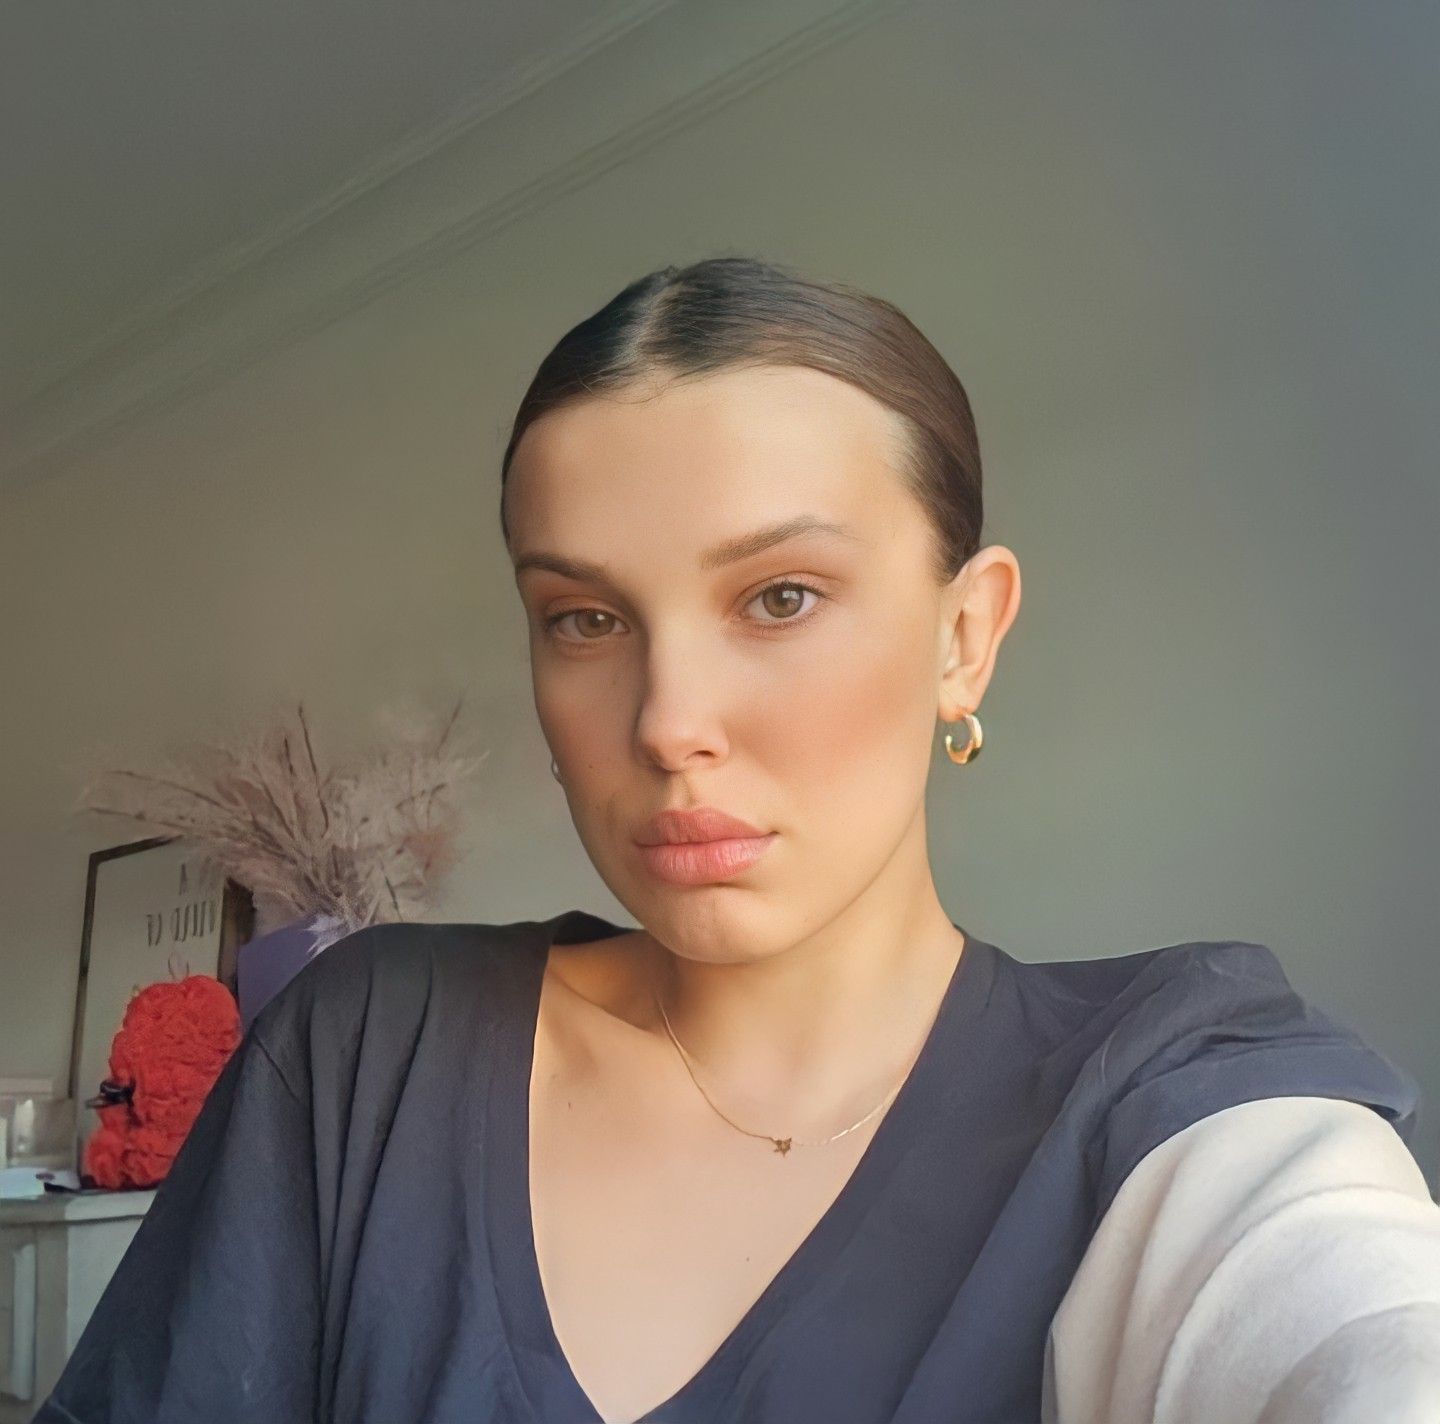 Millie Bobby Brown reveals her favourite red carpet look